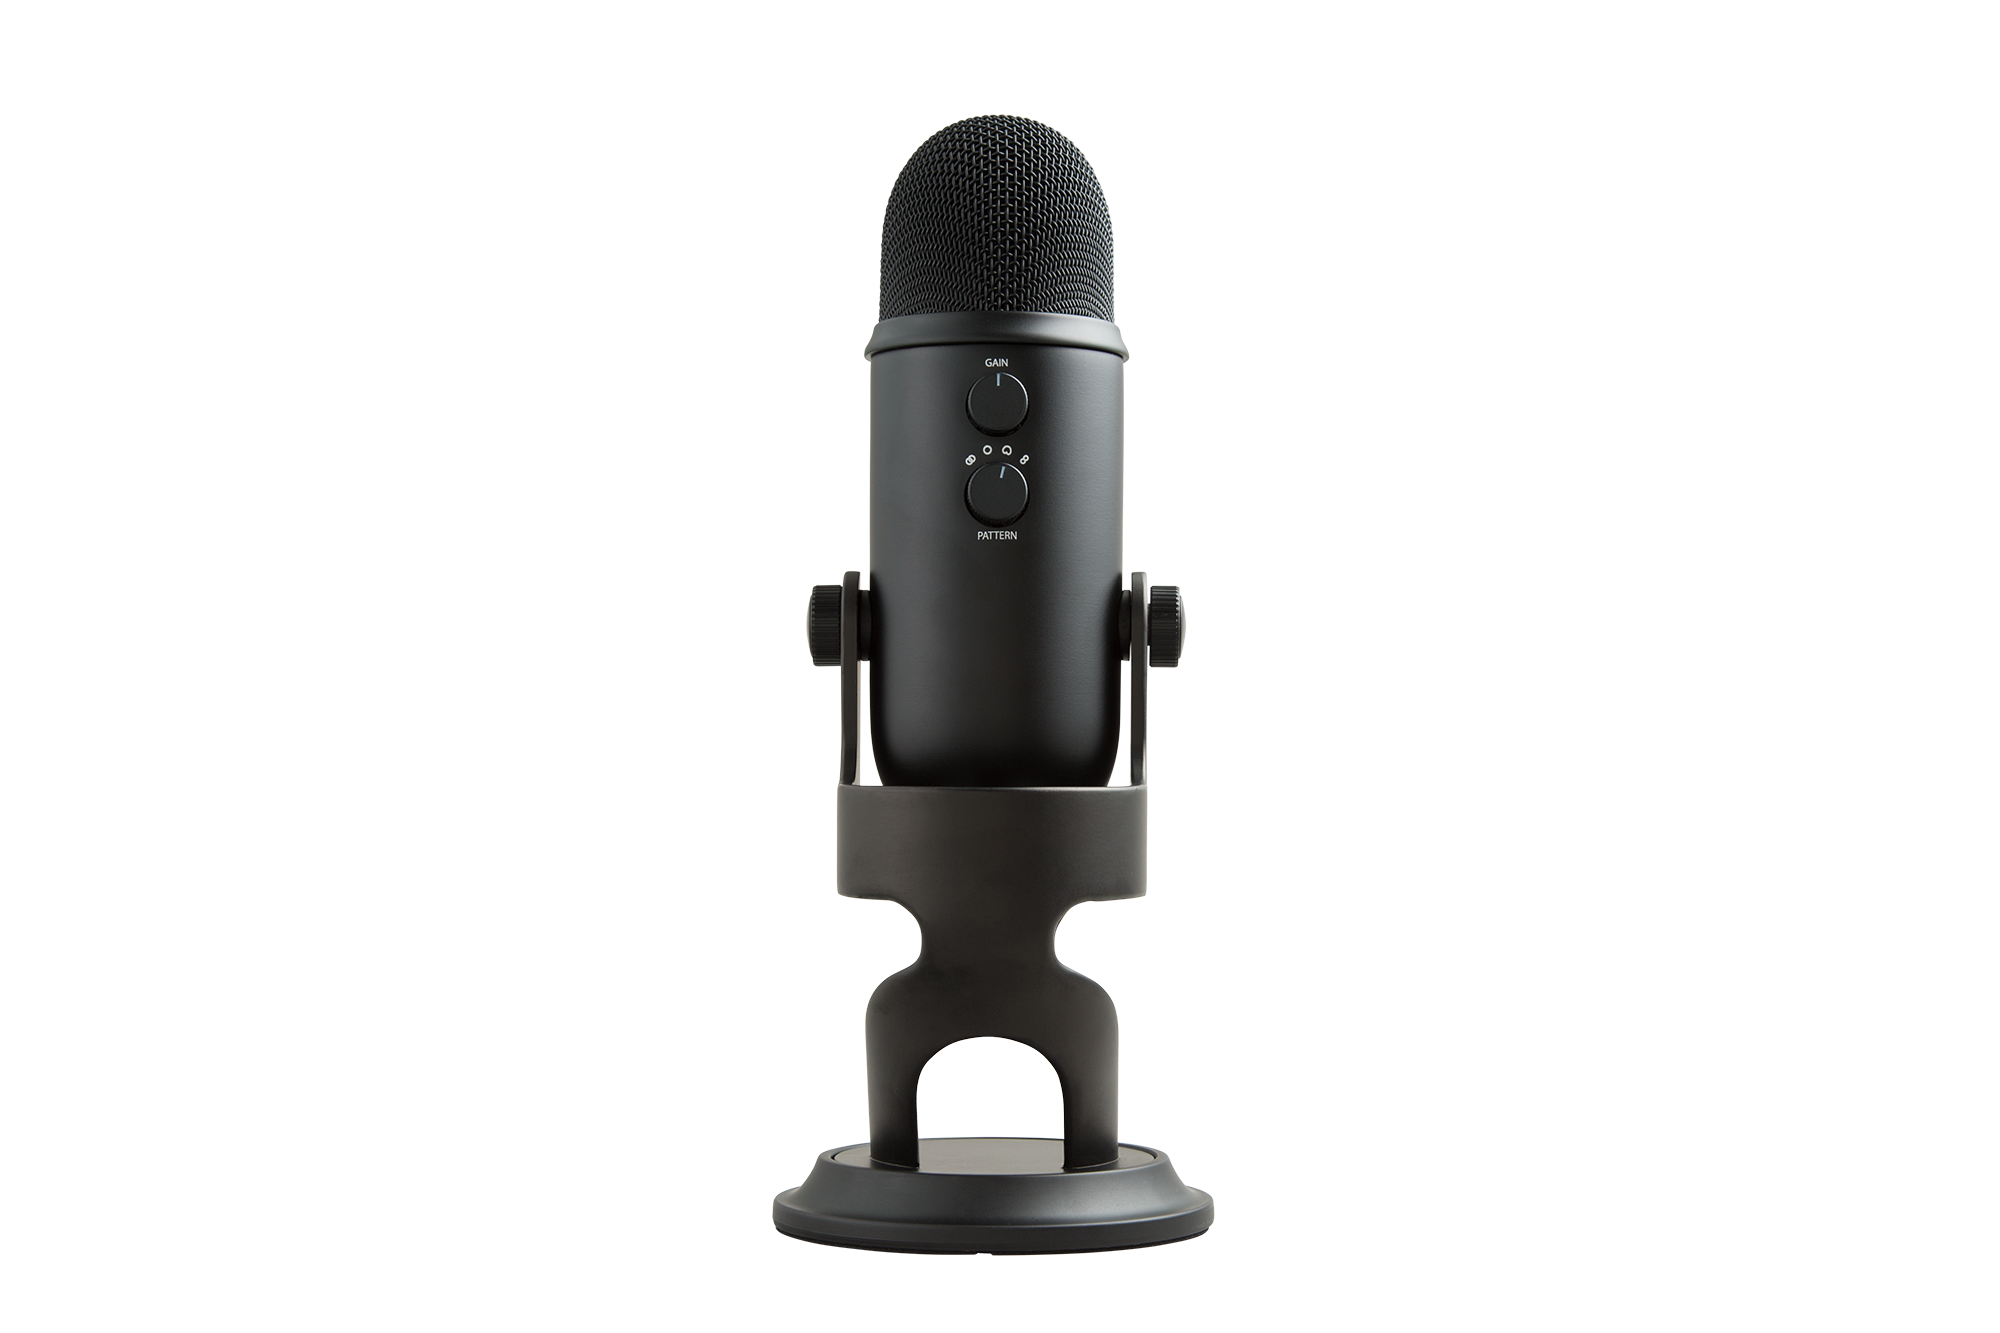 usb microphone compatible with xbox one